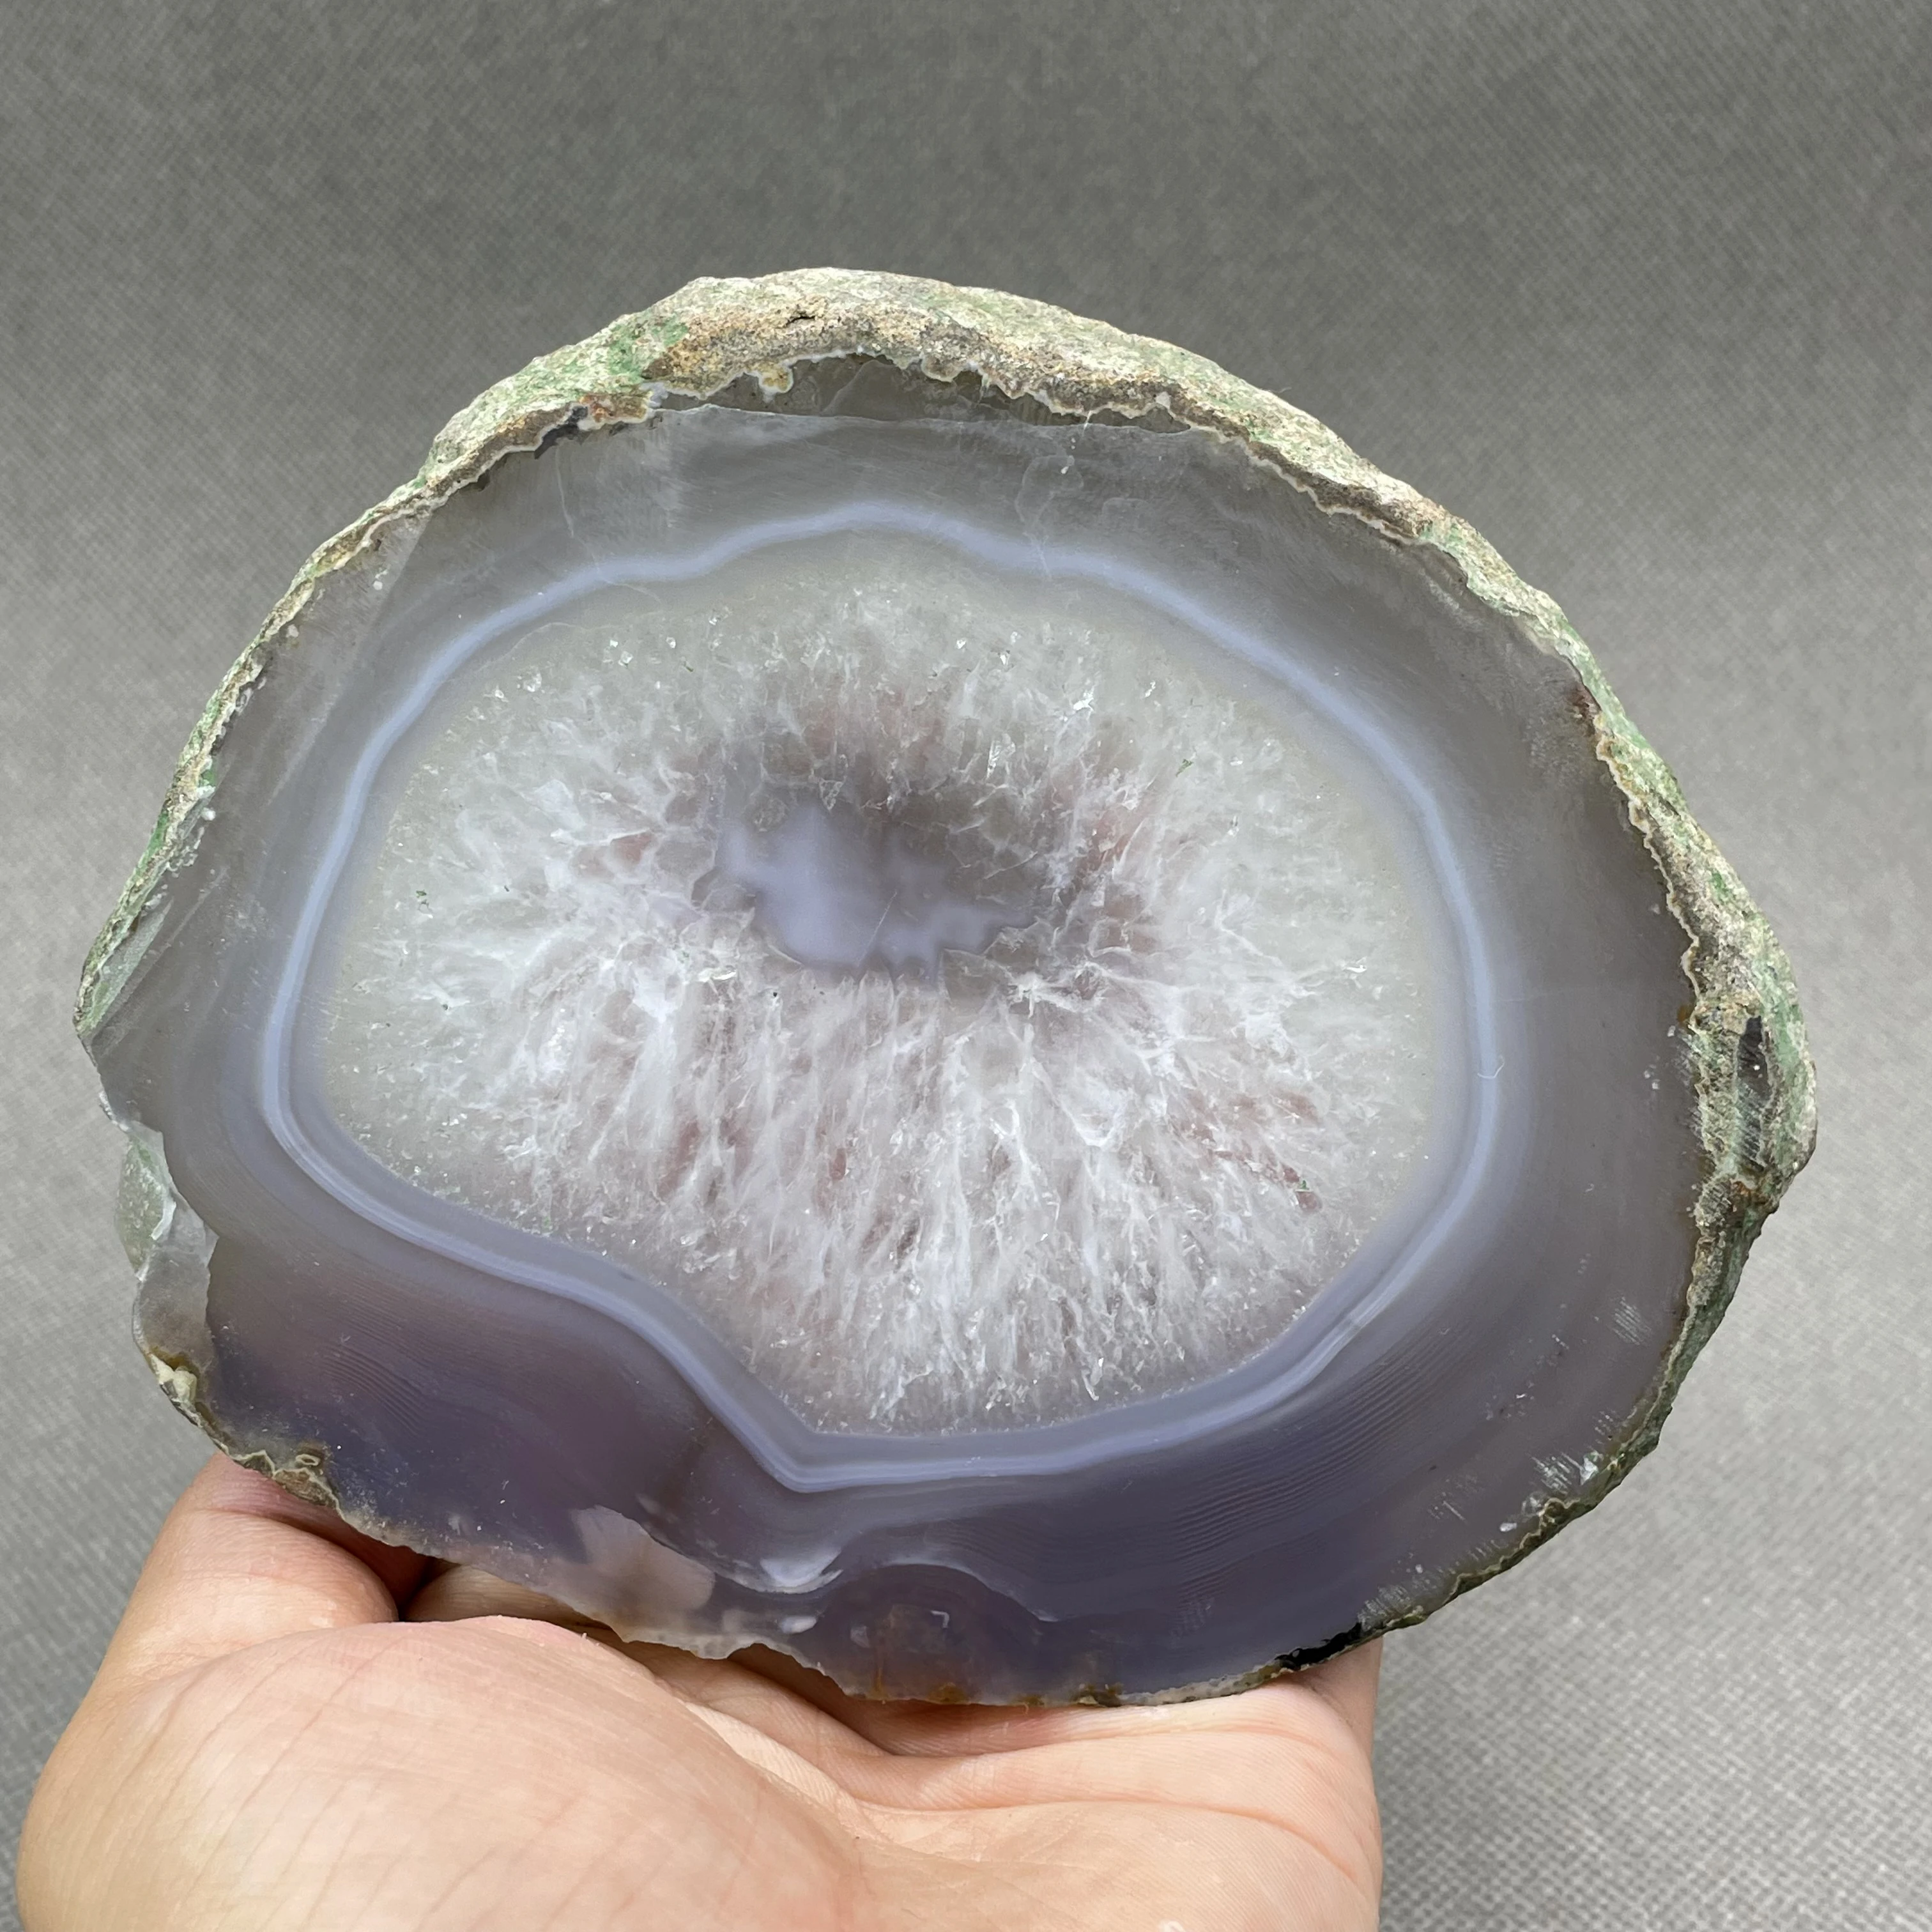 

NEW! Big! 313G Natural Agate Mineral specimen crystal agate slice cup coaster jewelry stone agate coaster mats